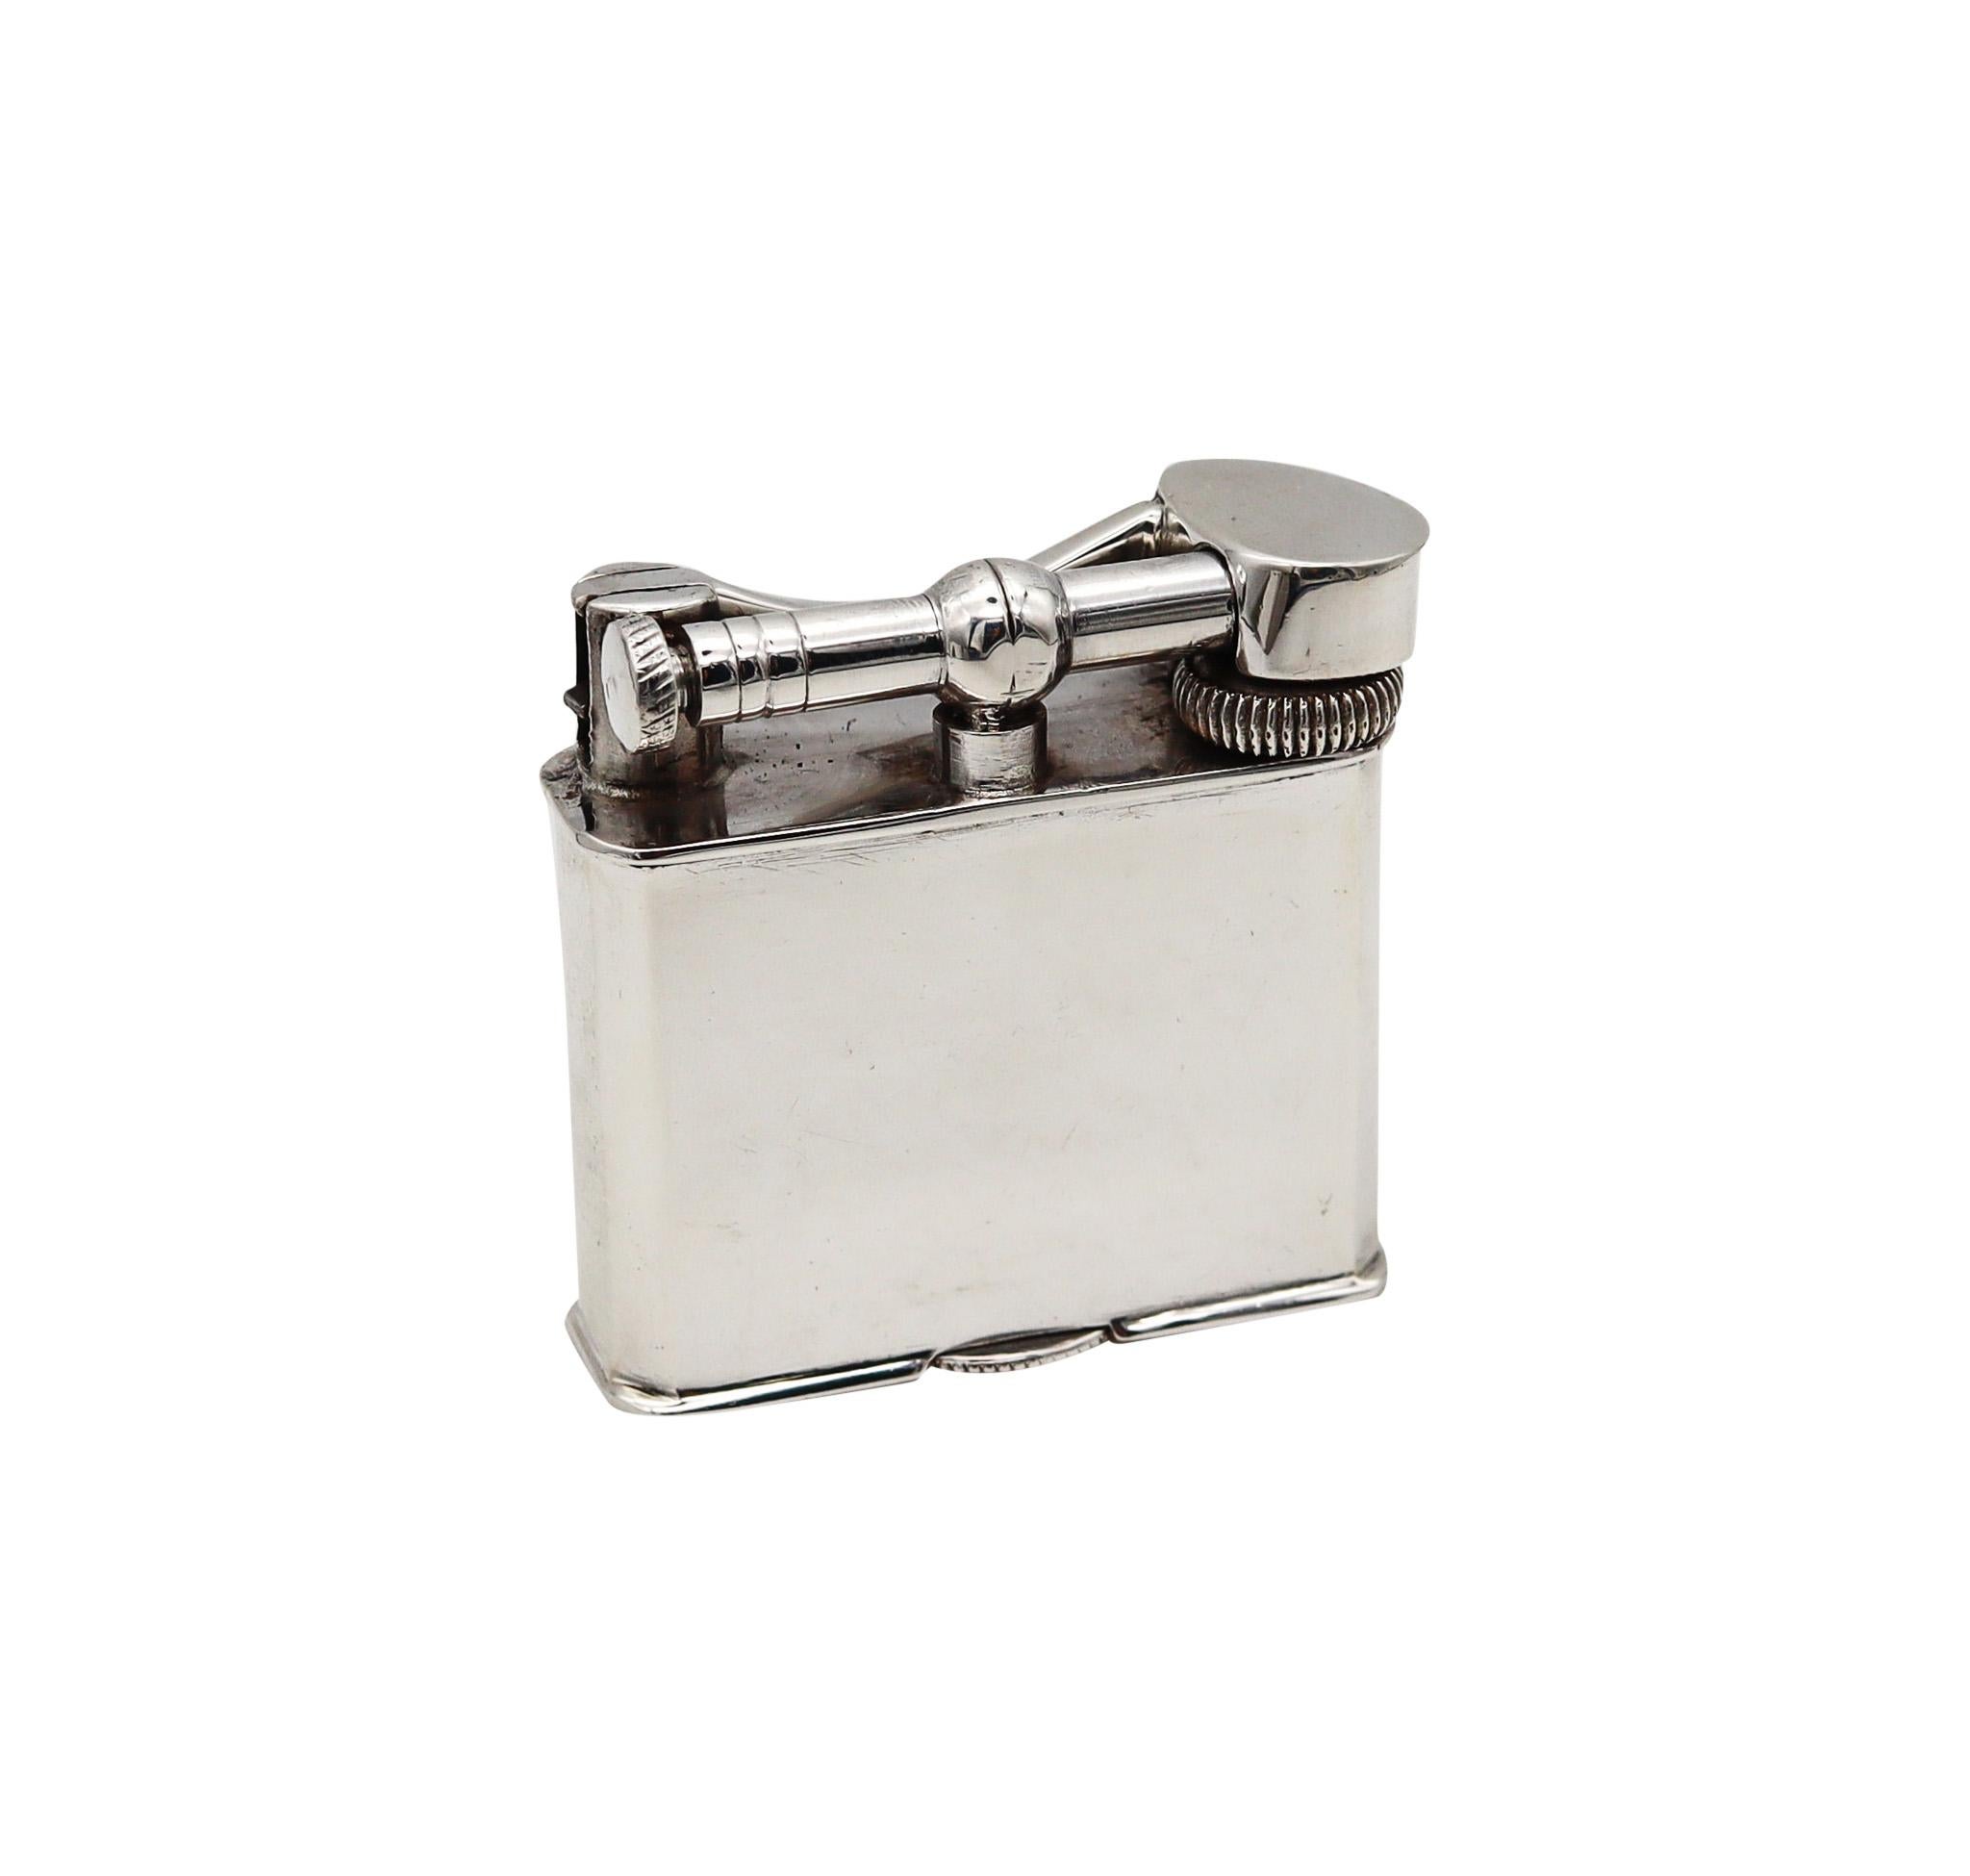 Lift arm petrol lighter made in Mexico

Beautiful lift arm petrol lighter, created in the city of Taxco in Mexico during the late Art Deco period, circa 1940. It was crafted in solid .925/.999 sterling silver with high polished finish. The system